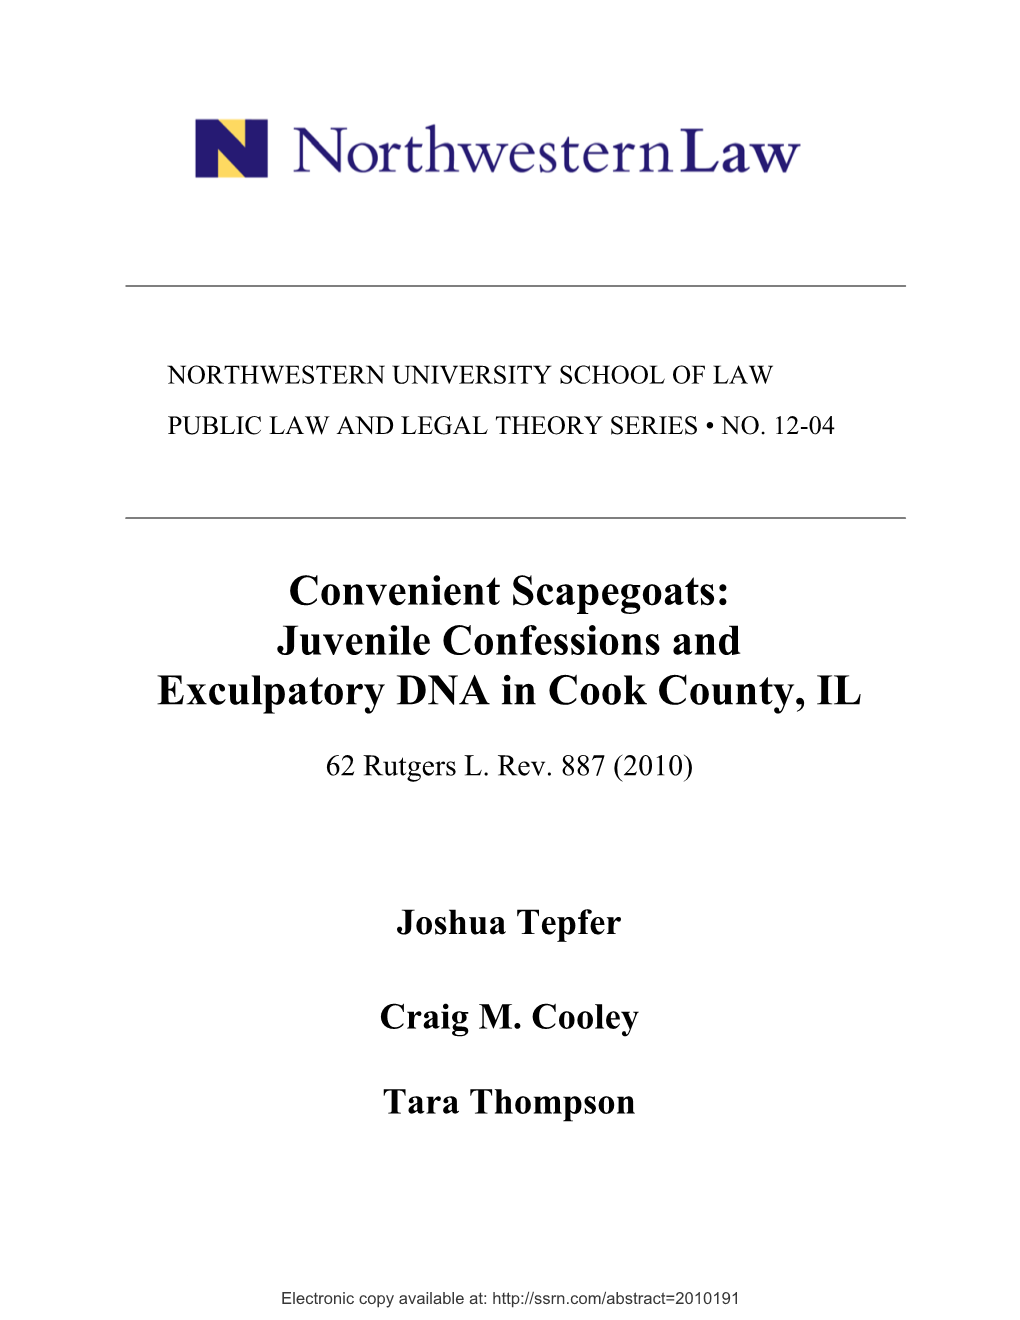 Convenient Scapegoats: Juvenile Confessions and Exculpatory DNA in Cook County, IL